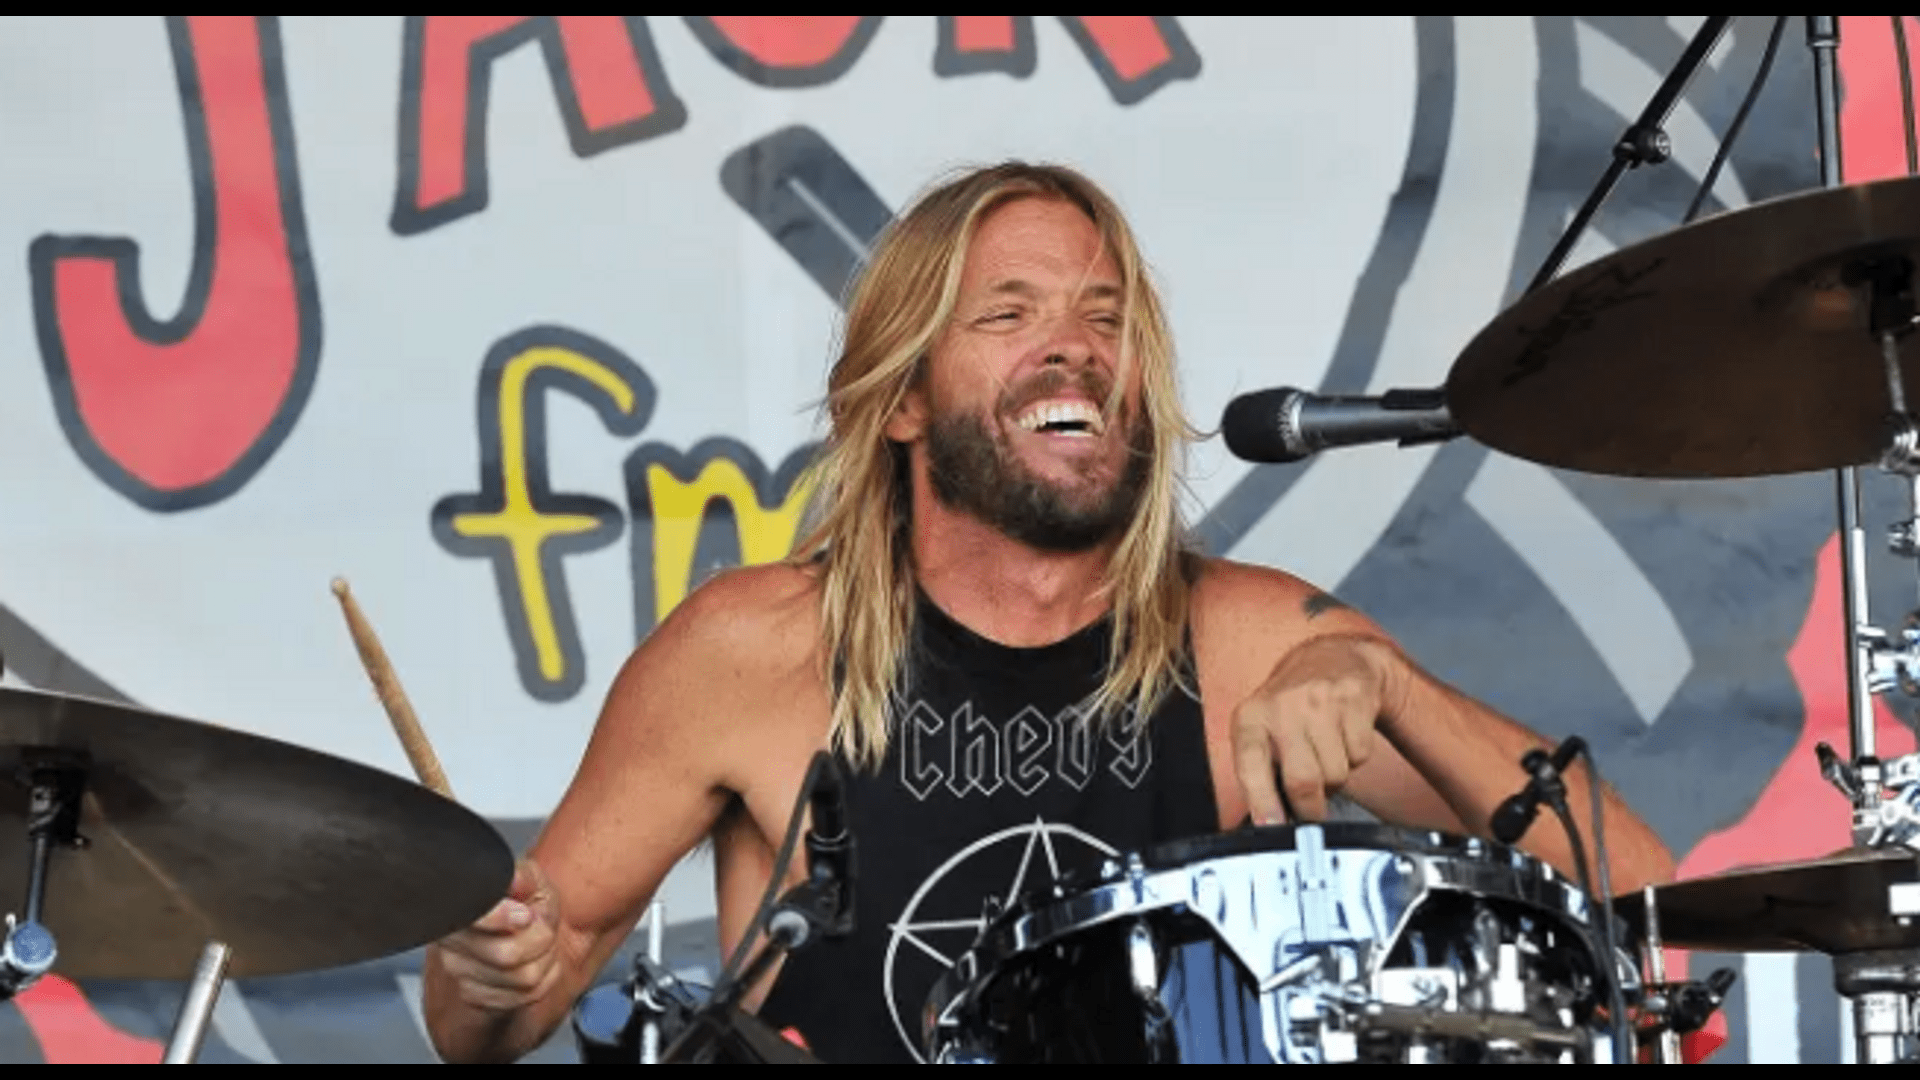 the-foo-fighters-have-canceled-their-current-world-tour-following-the-death-of-taylor-hawkins